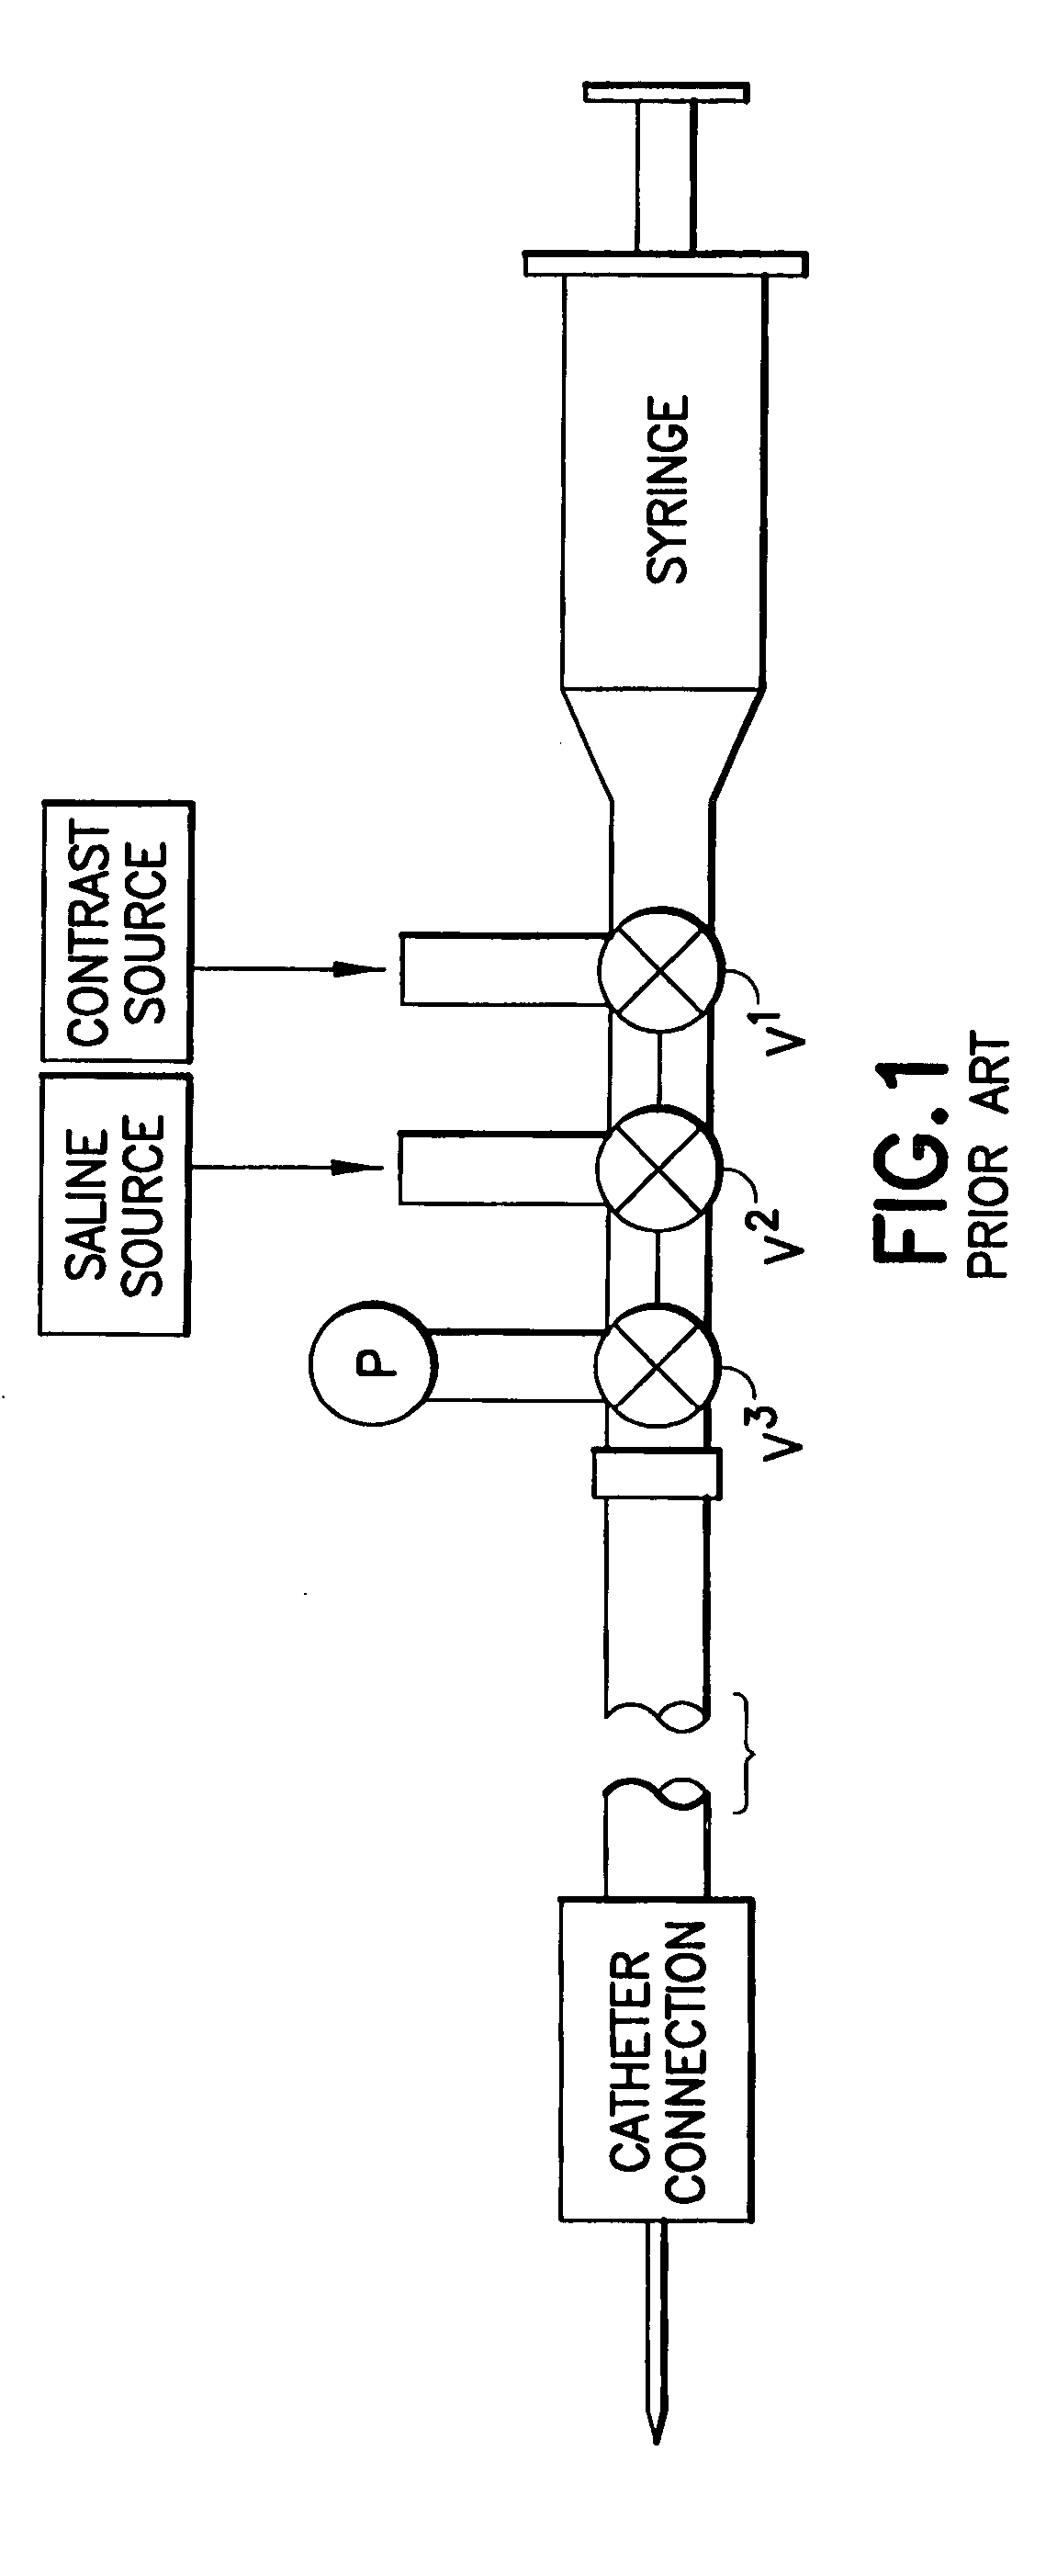 Fluid delivery system, fluid path set, sterile connector and improved drip chamber and pressure isolation mechanism